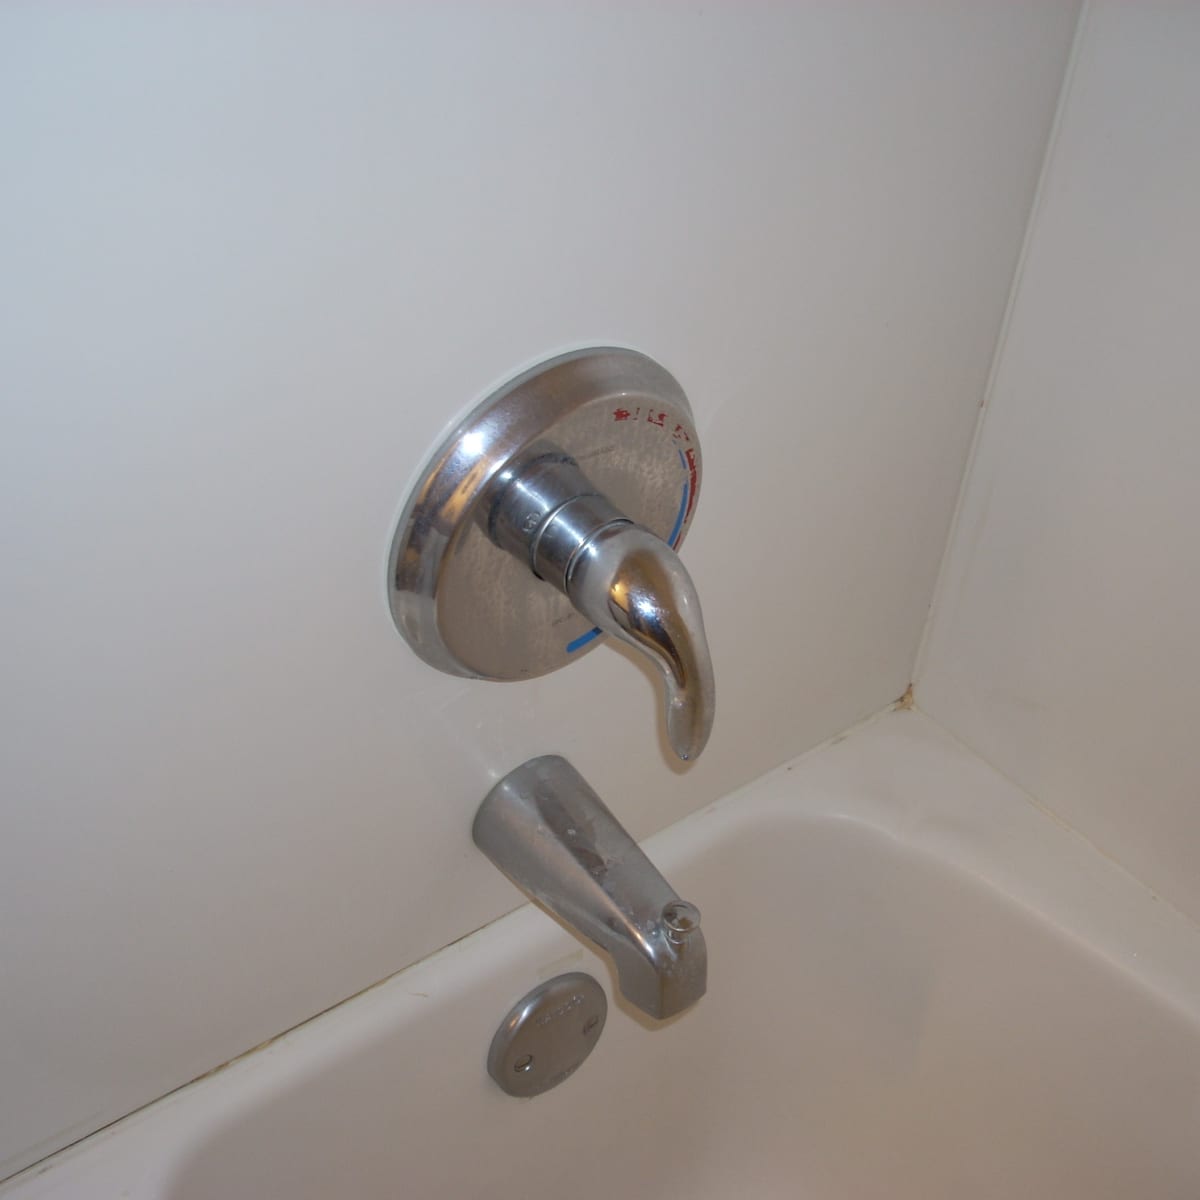 Single Handle Bathtub Faucet Yourself, How To Replace A Two Handle Bathtub Faucet